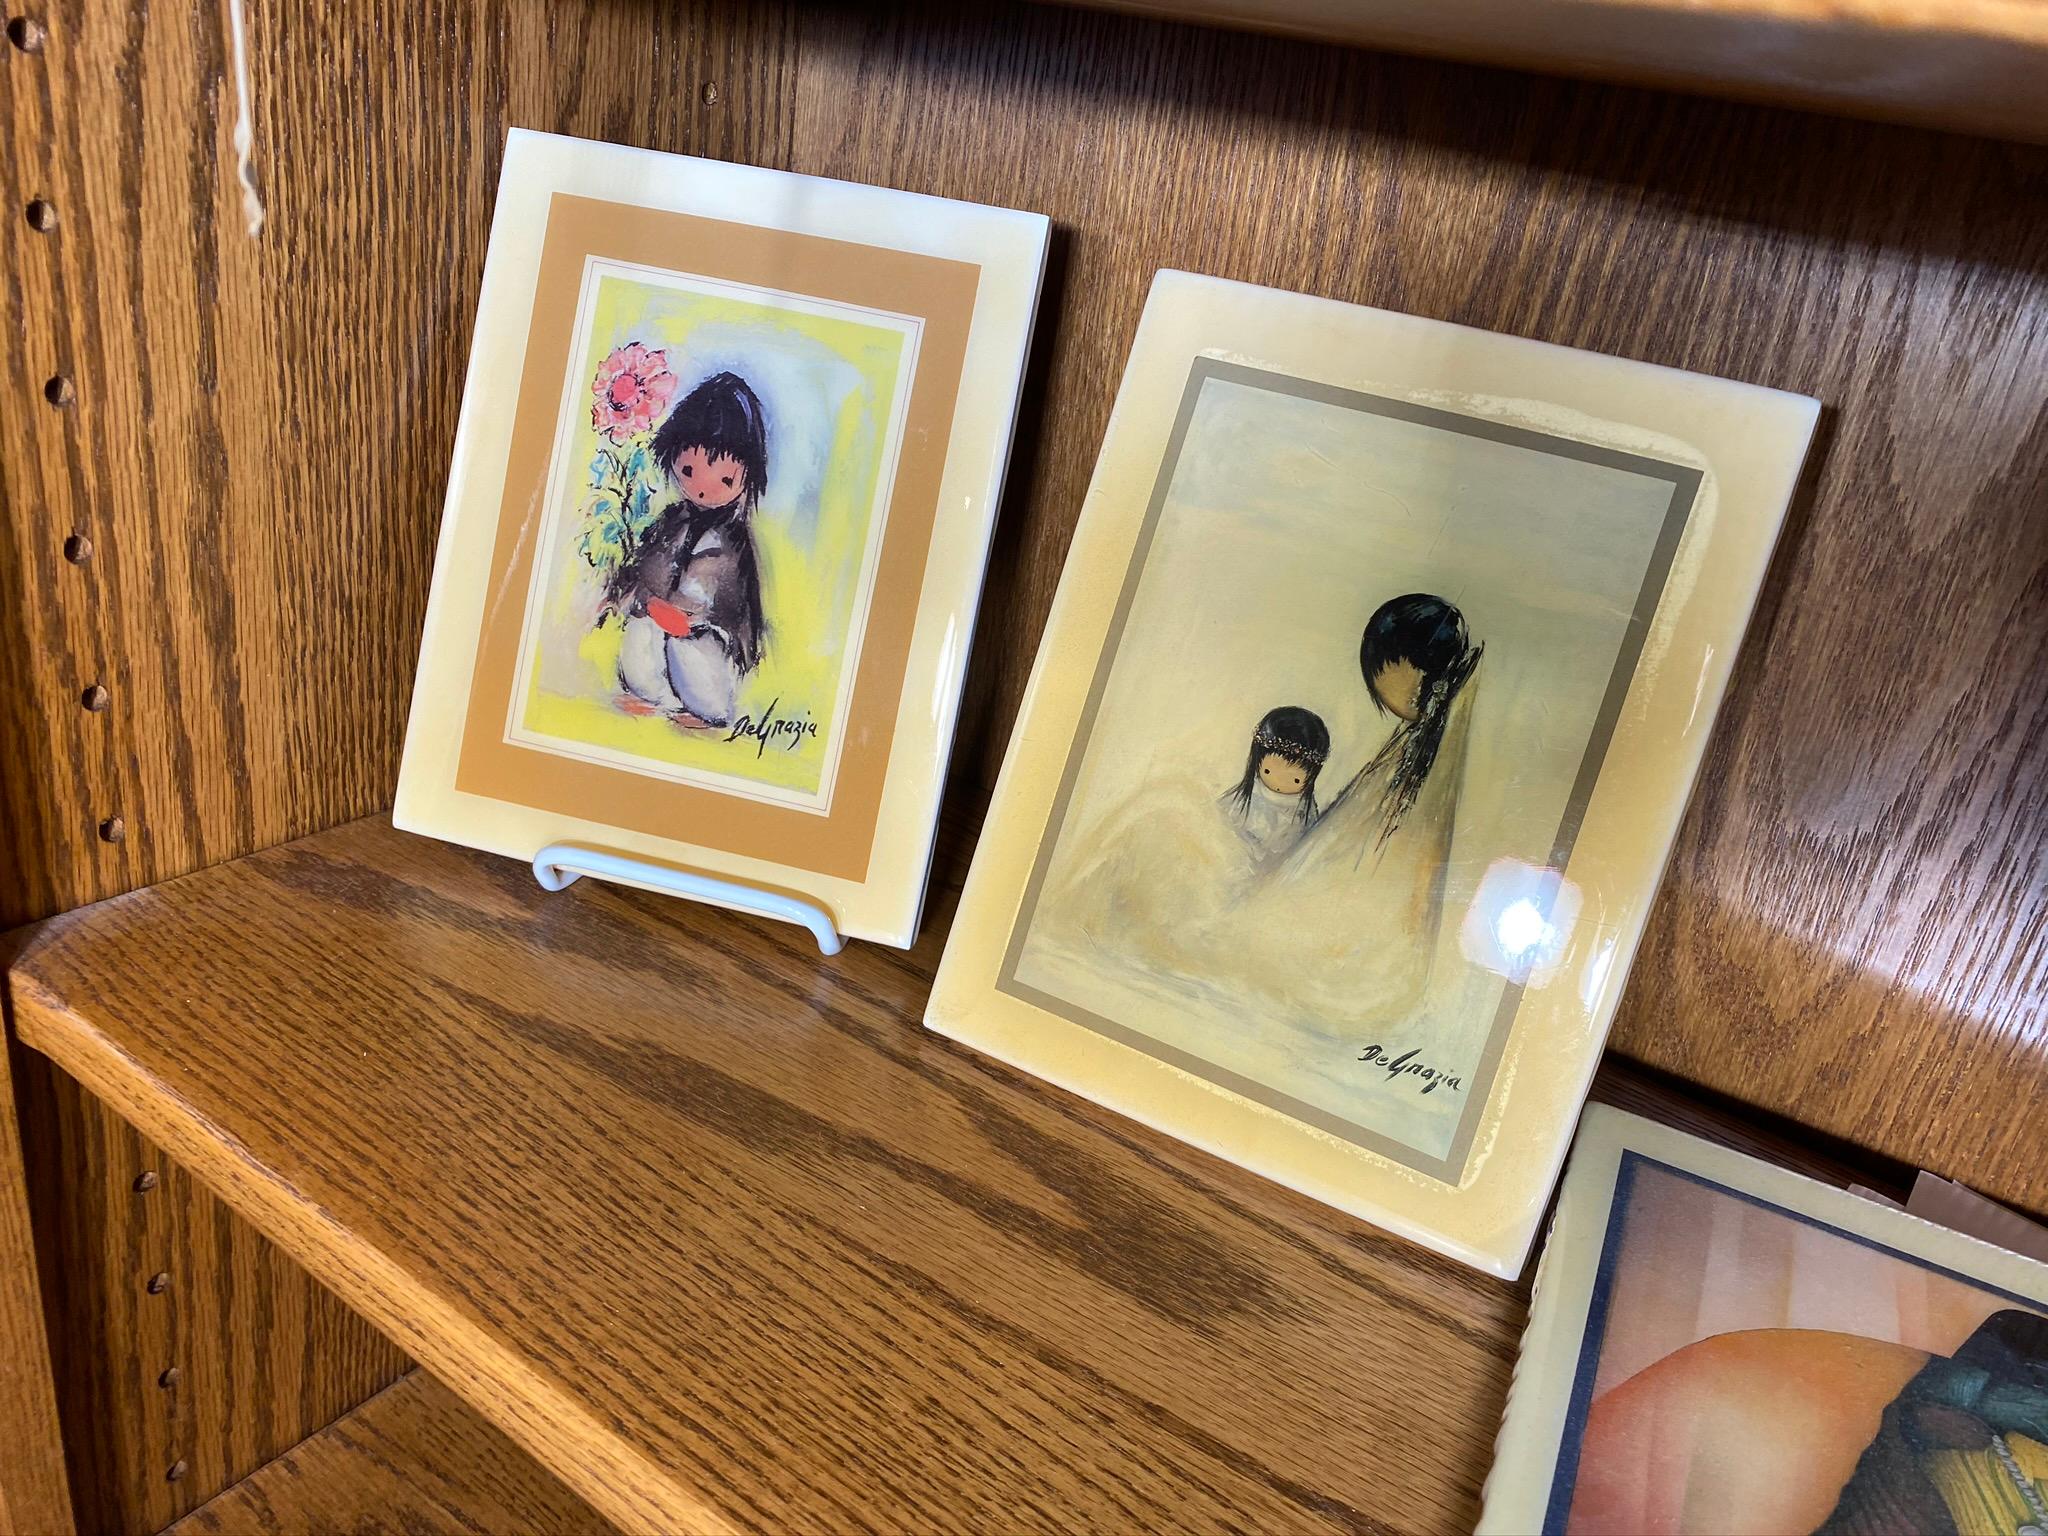 Shelf lot of DeGrazia Art pieces and more